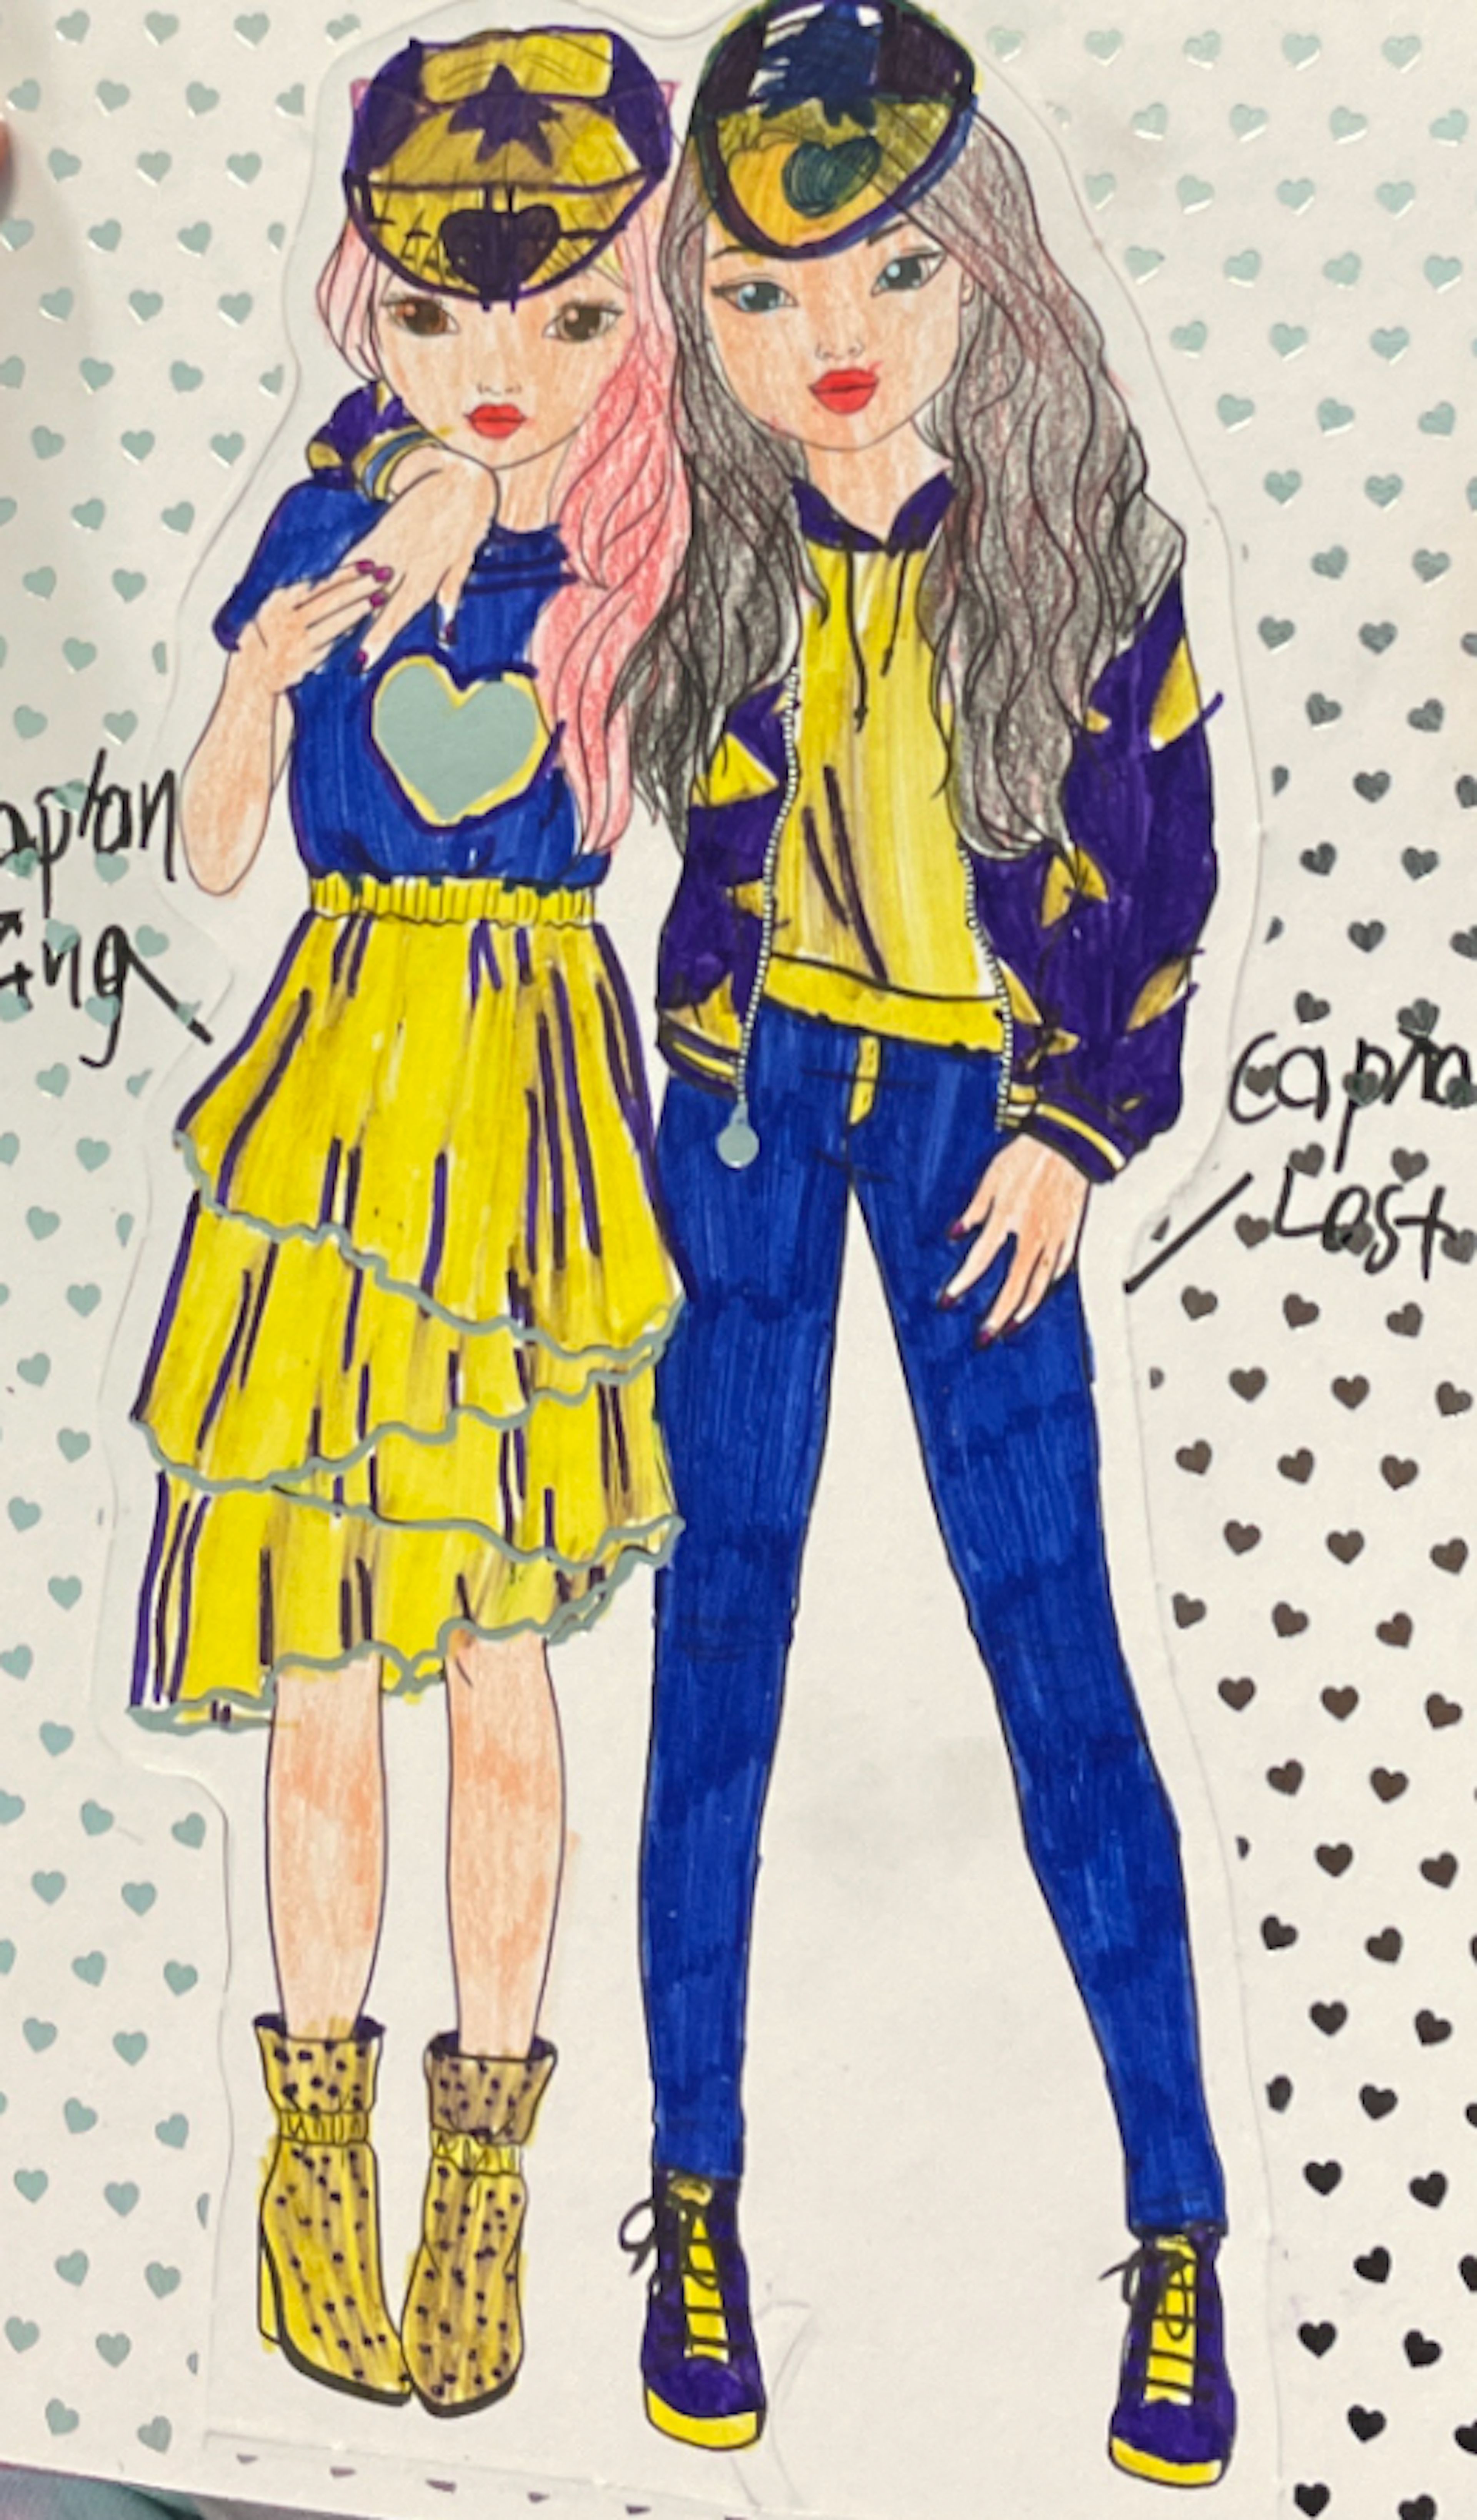 This is my colouring of captain Zing & captain Lost from Gold Coast University hospital………….thank you soo much for your visit, you really made my day 😃